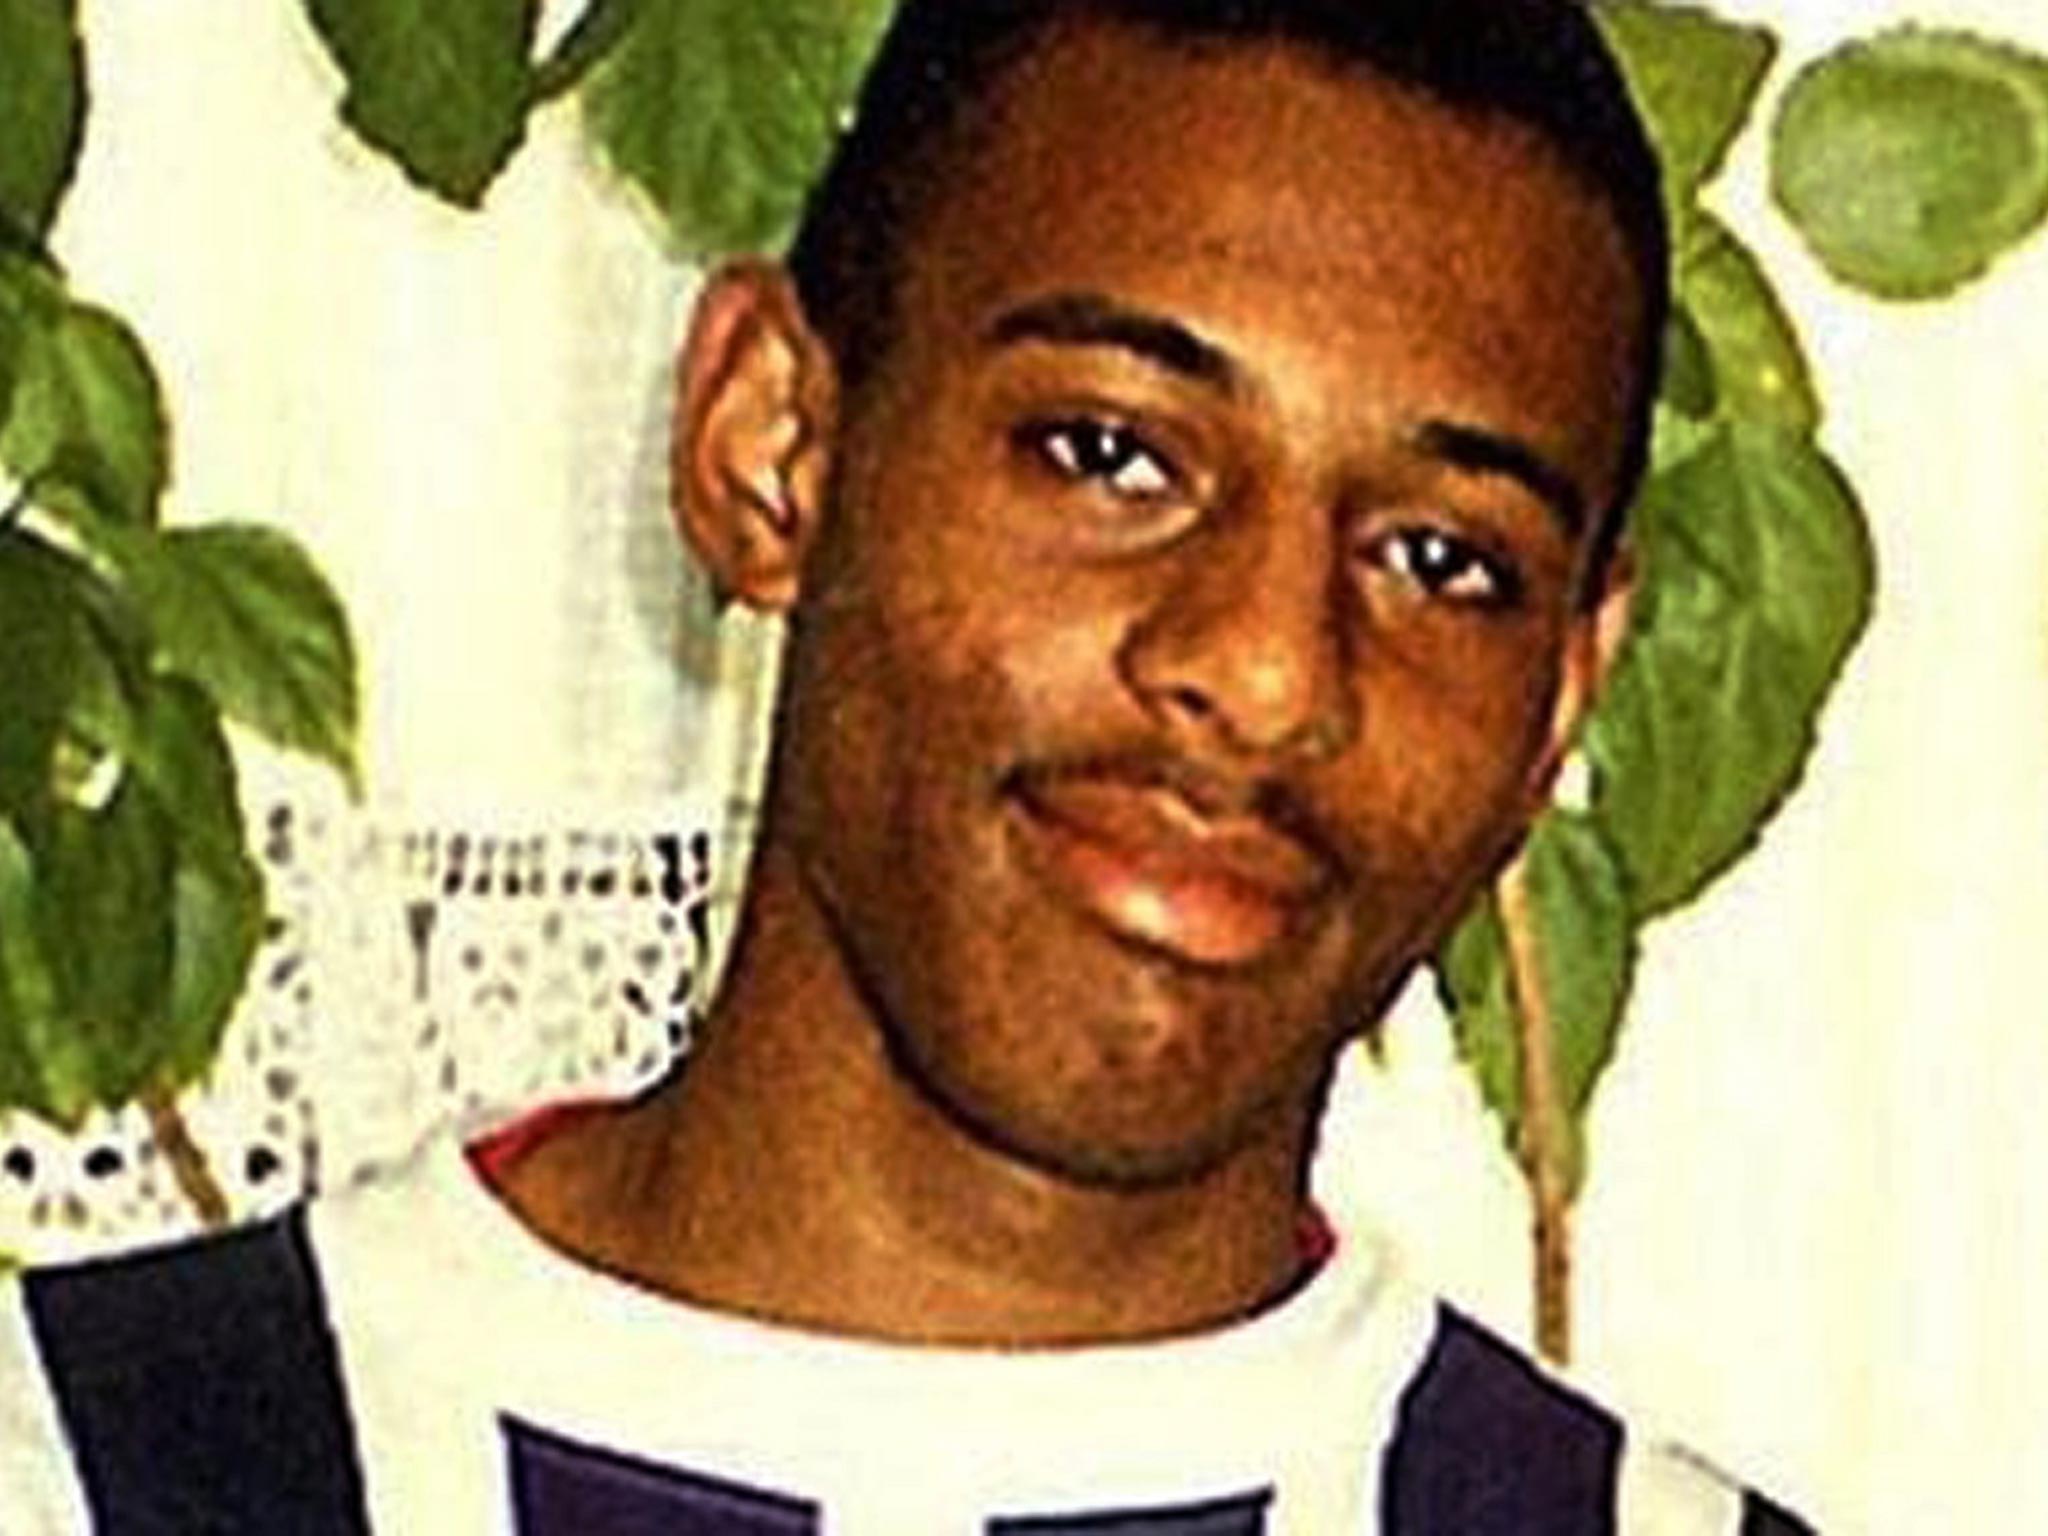 Stephen Lawrence was stabbed to death by white youths in 1993